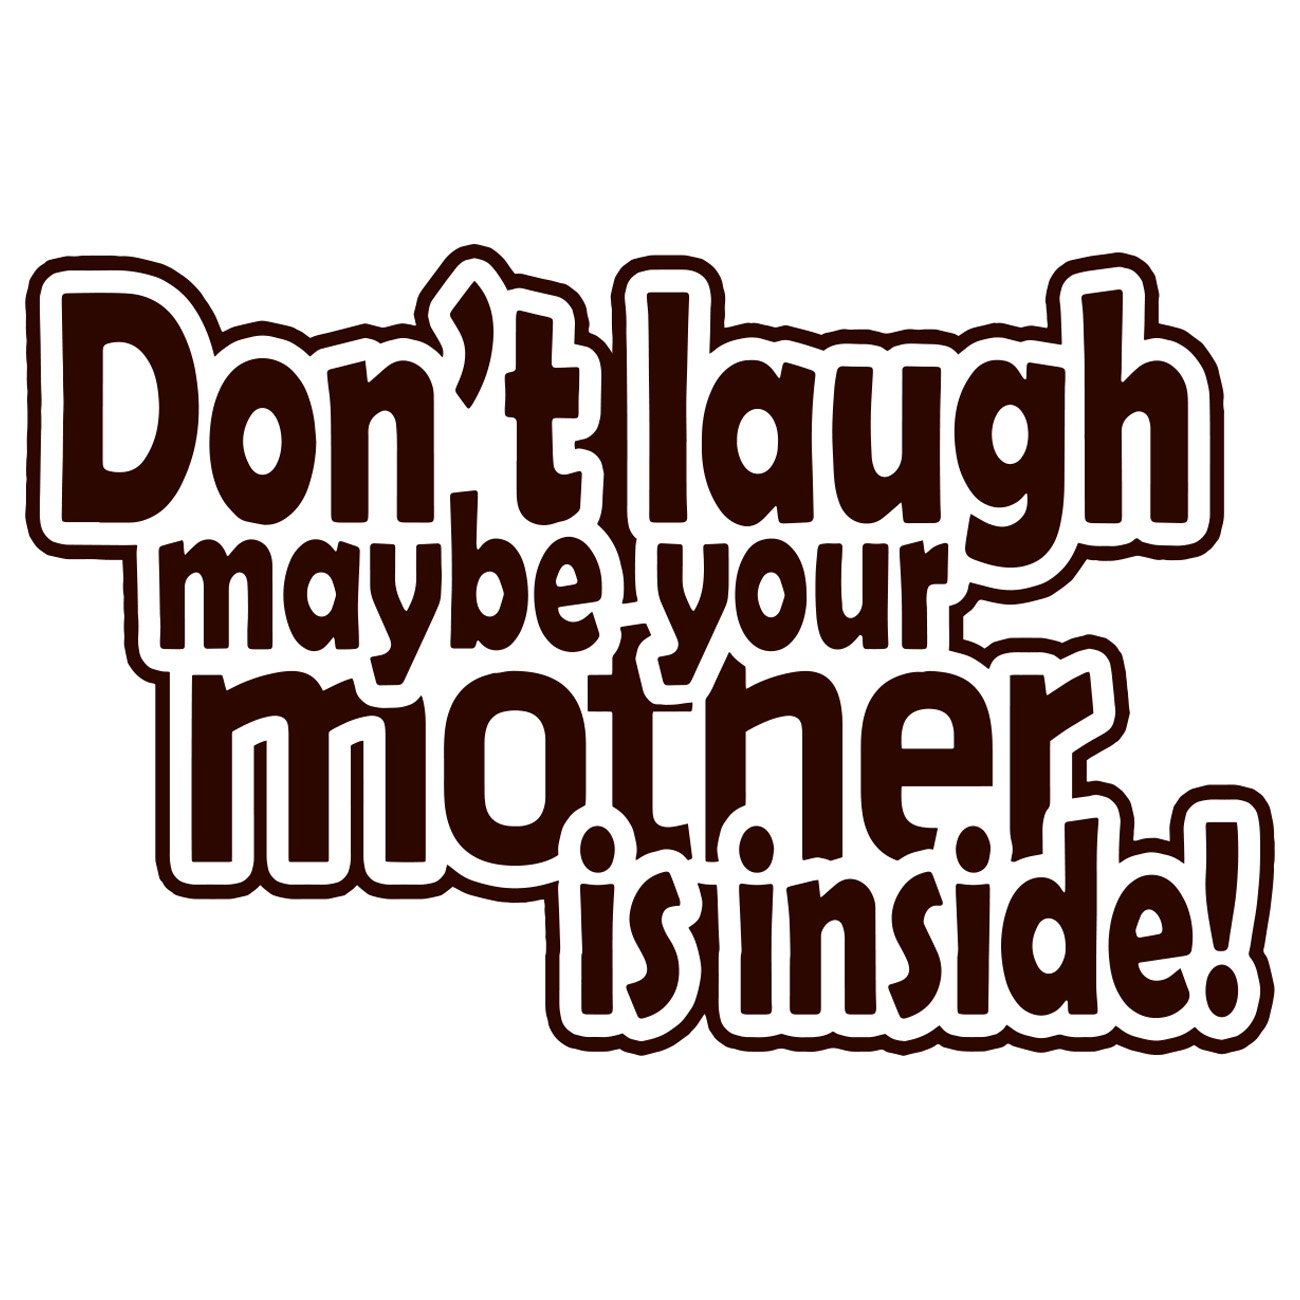 Dont laugh maybe your mother is inside